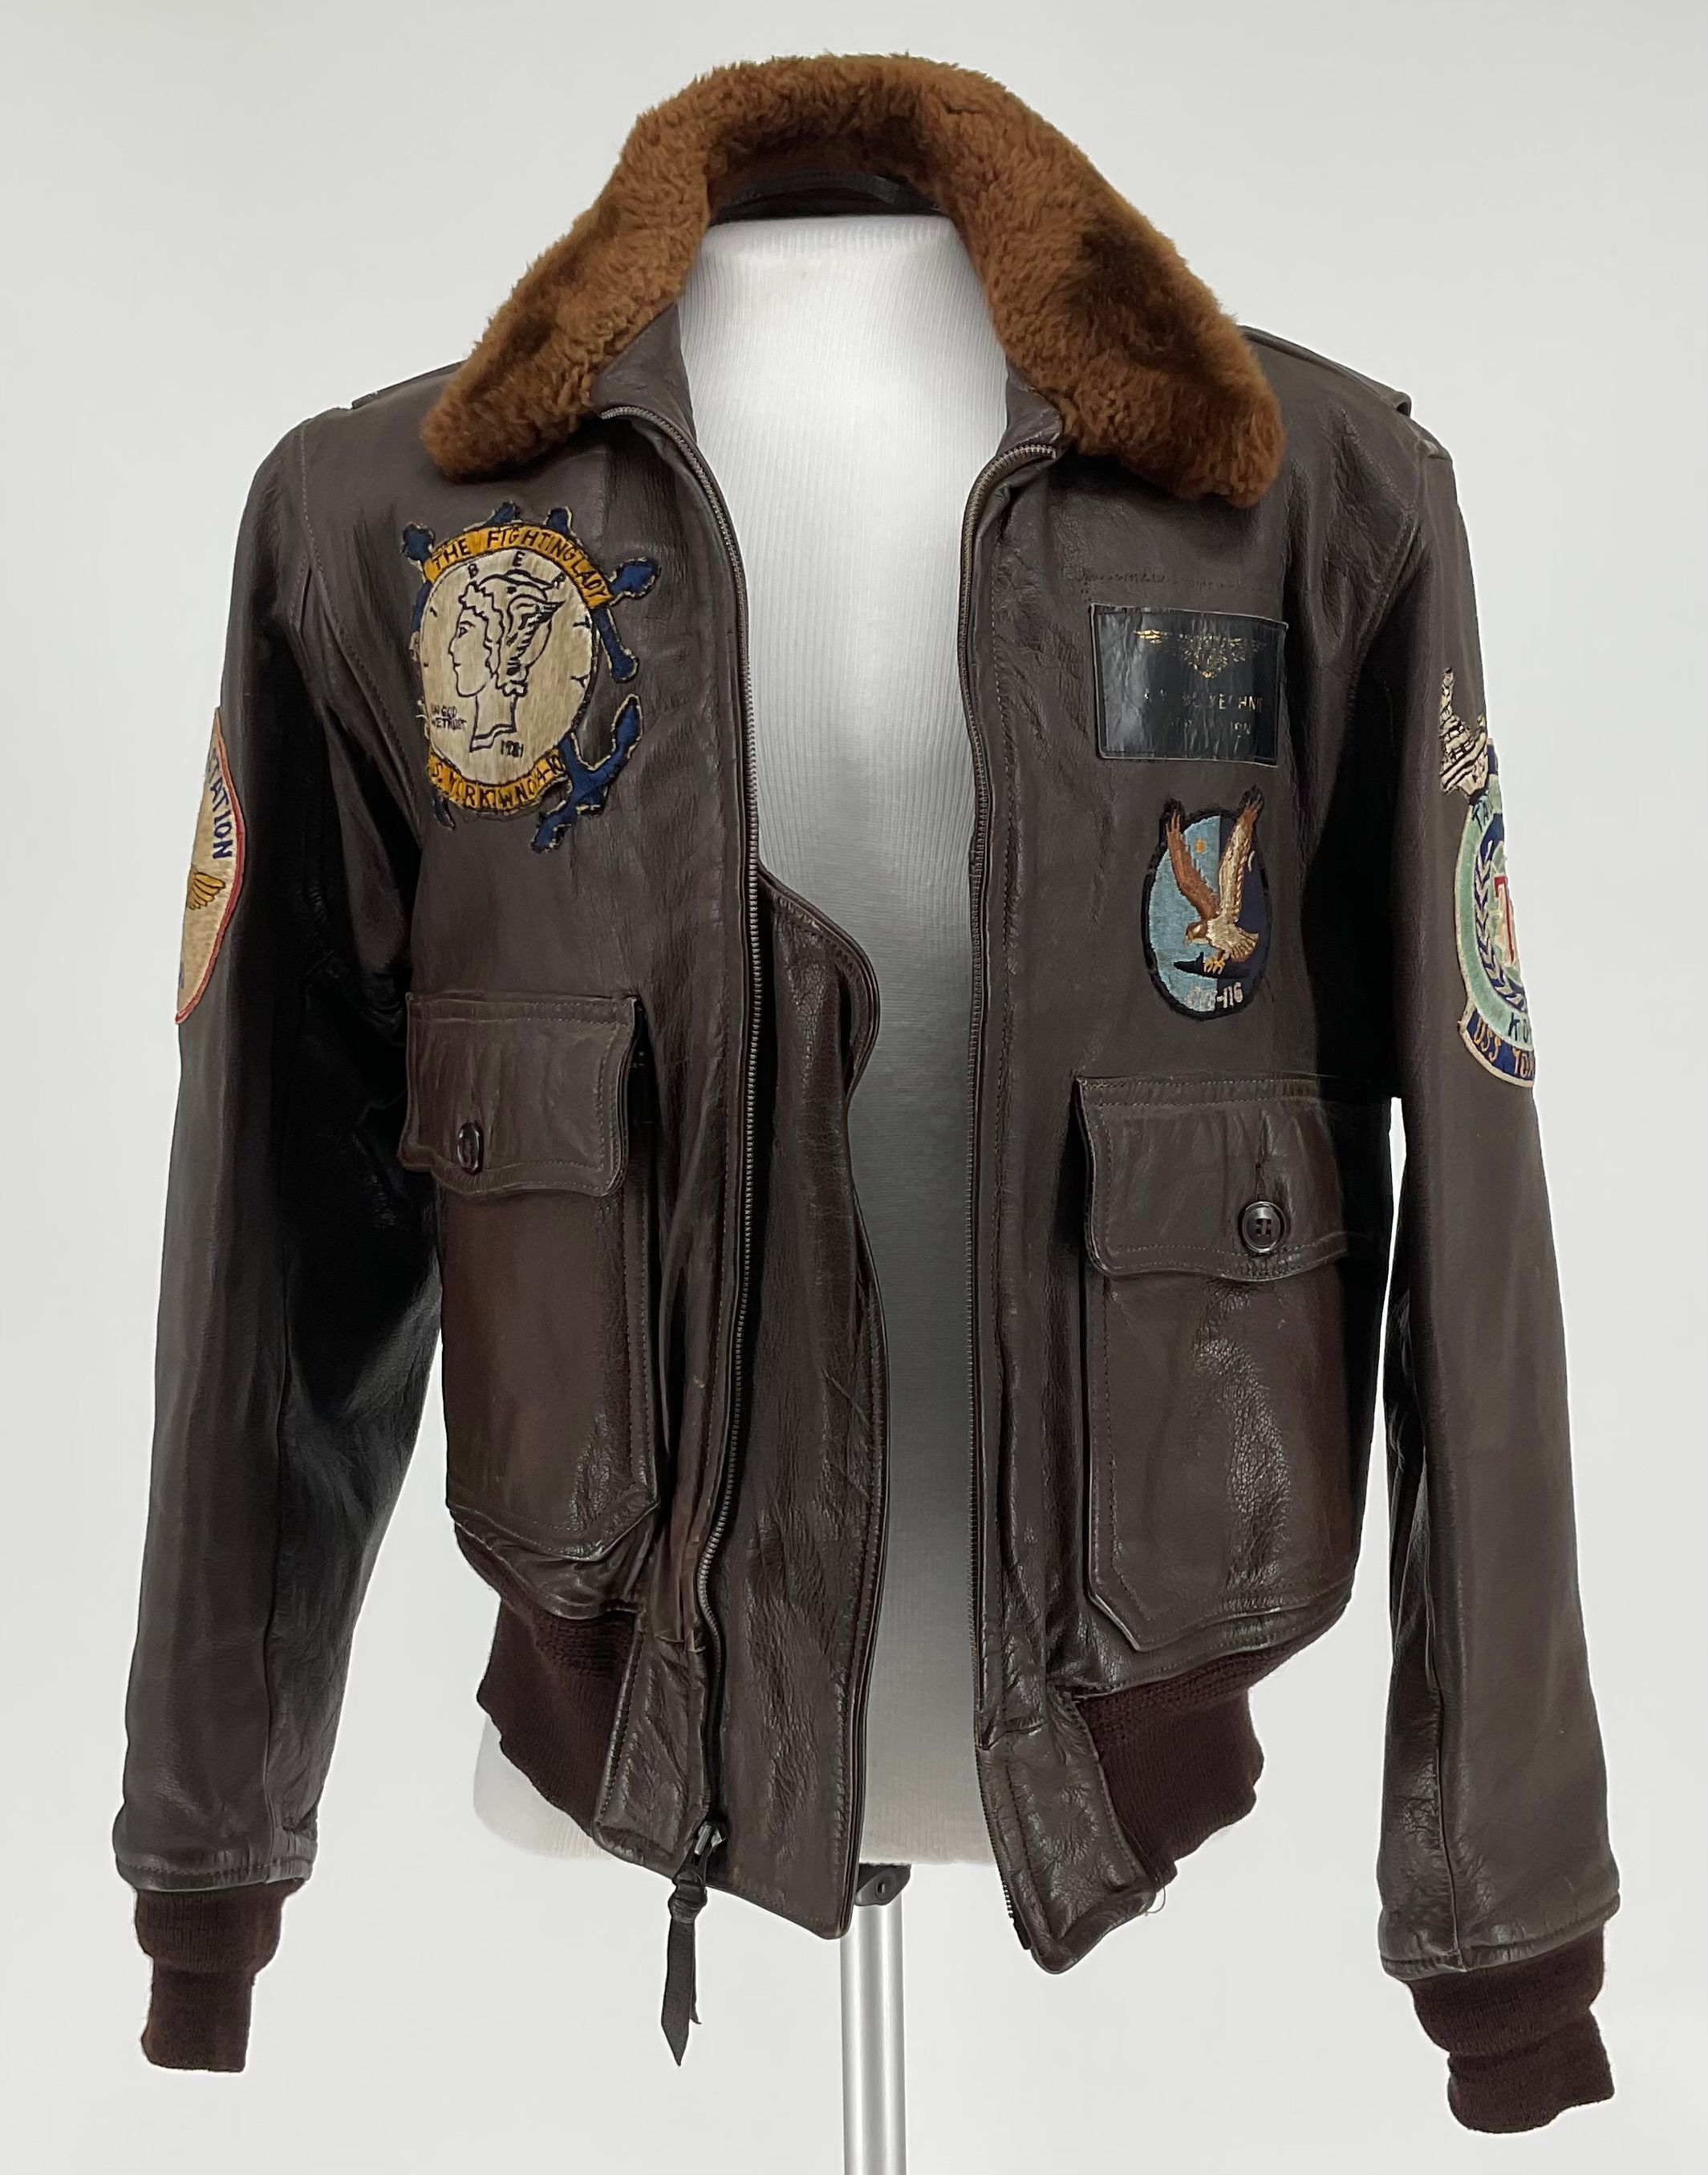 Primary Image of Leather Flight Jacket of Arnold McKechnie